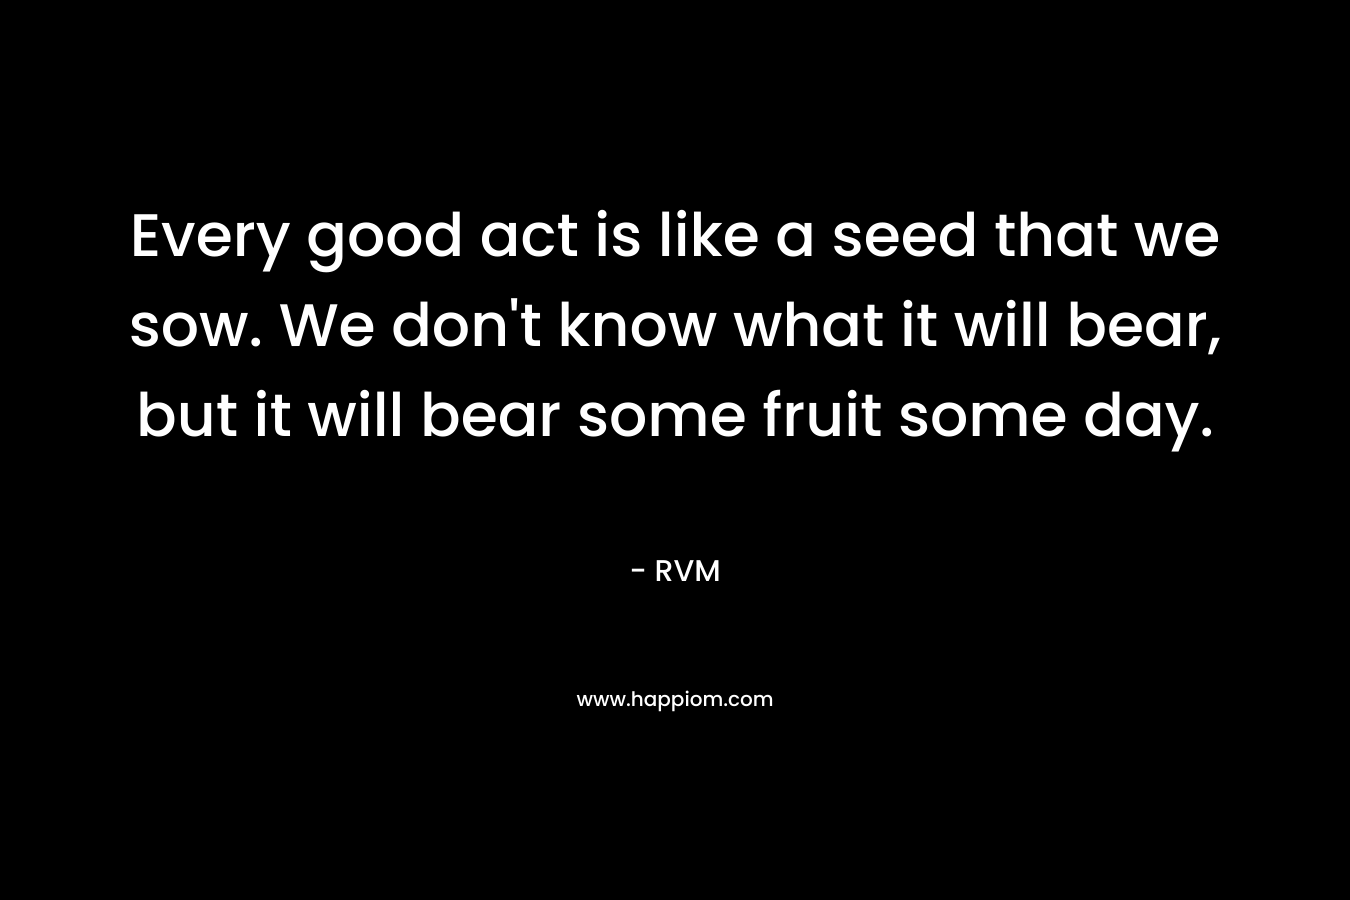 Every good act is like a seed that we sow. We don't know what it will bear, but it will bear some fruit some day.